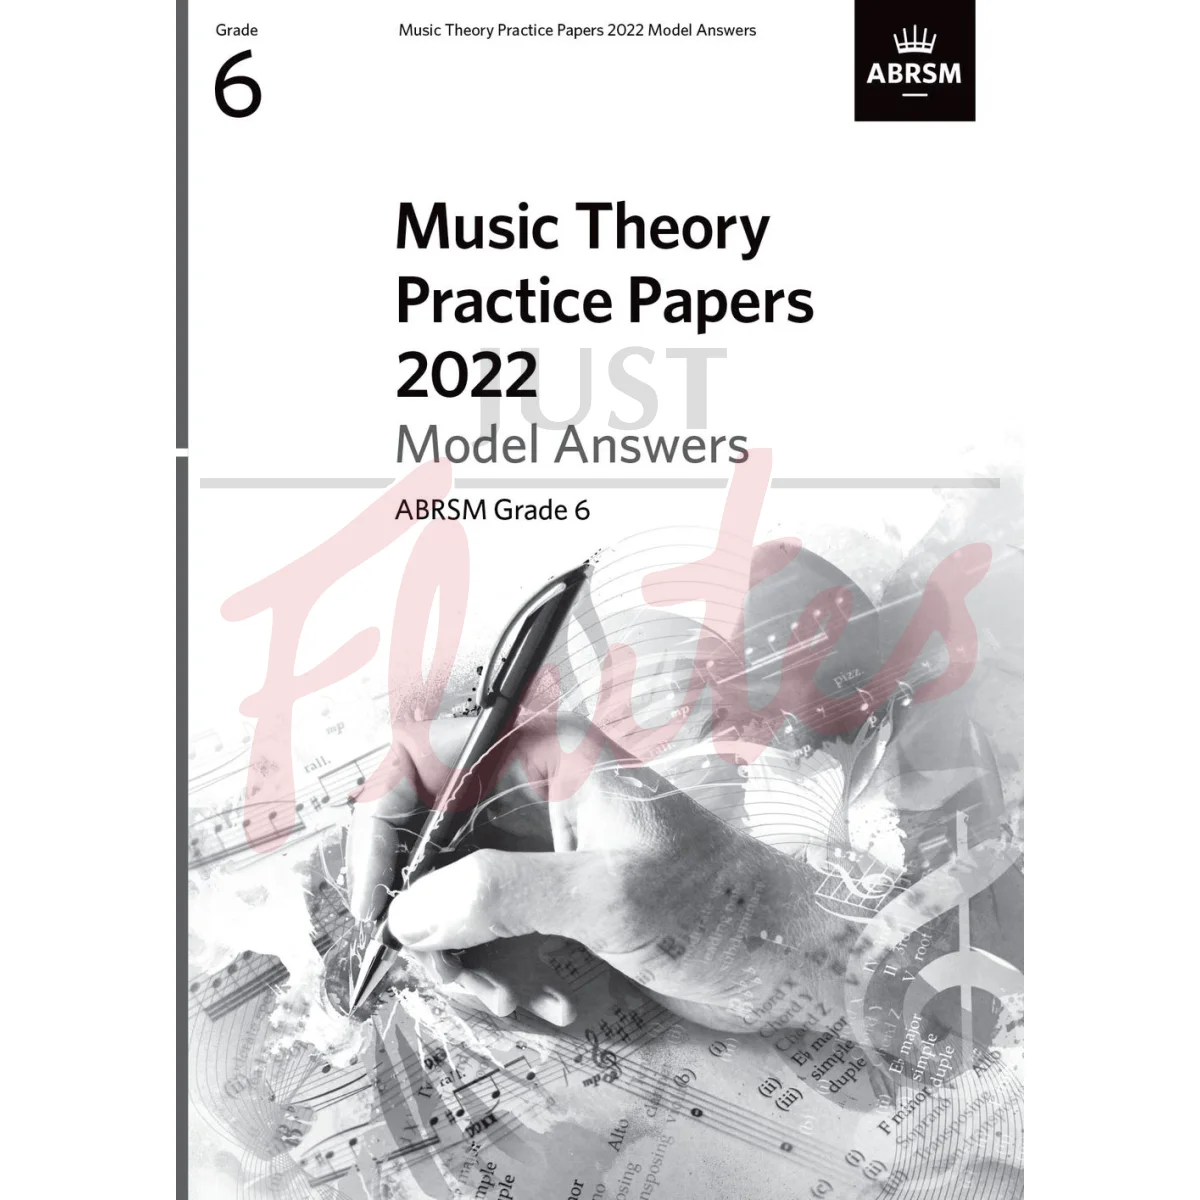 Music Theory Practice Papers 2022 Grade 6 - Model Answers